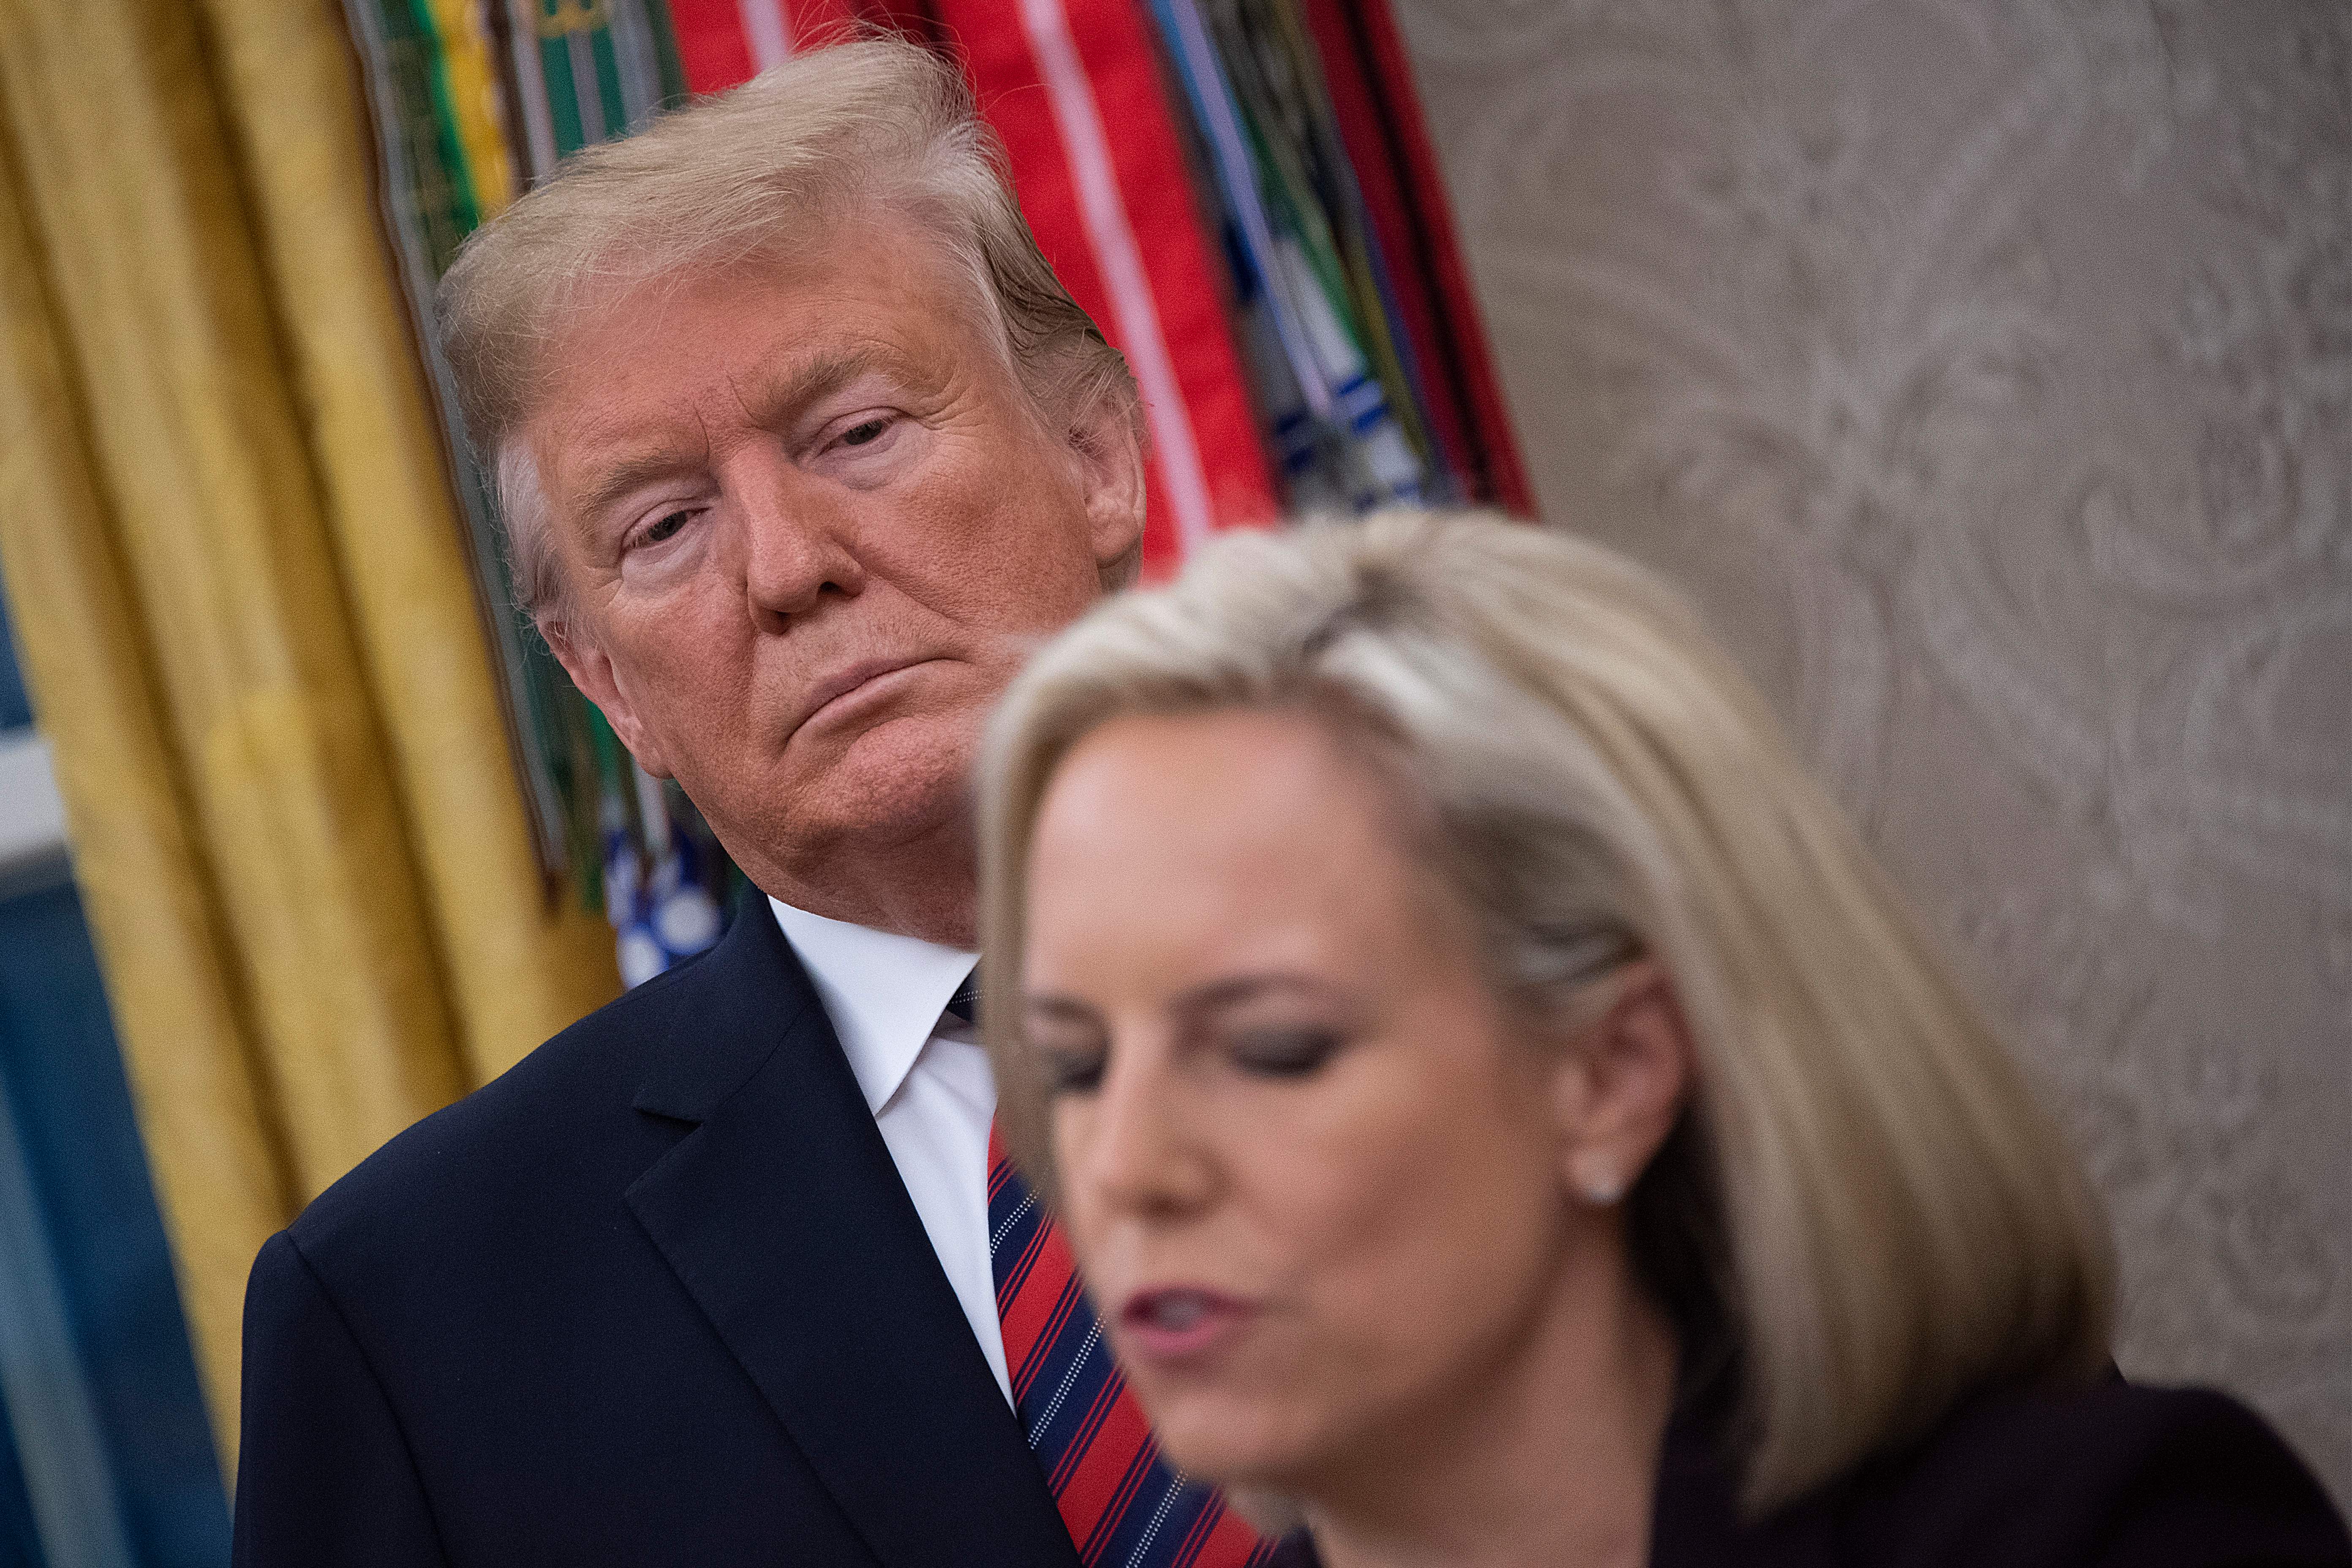 US President Donald Trump (L) and US Secretary of Homeland Security Kirstjen Nielsen (R) participate in a Naturalization Ceremony in the Oval Office of the White House in Washington, DC, on January 19, 2019. (Photo: JIM WATSON/AFP/Getty Images)